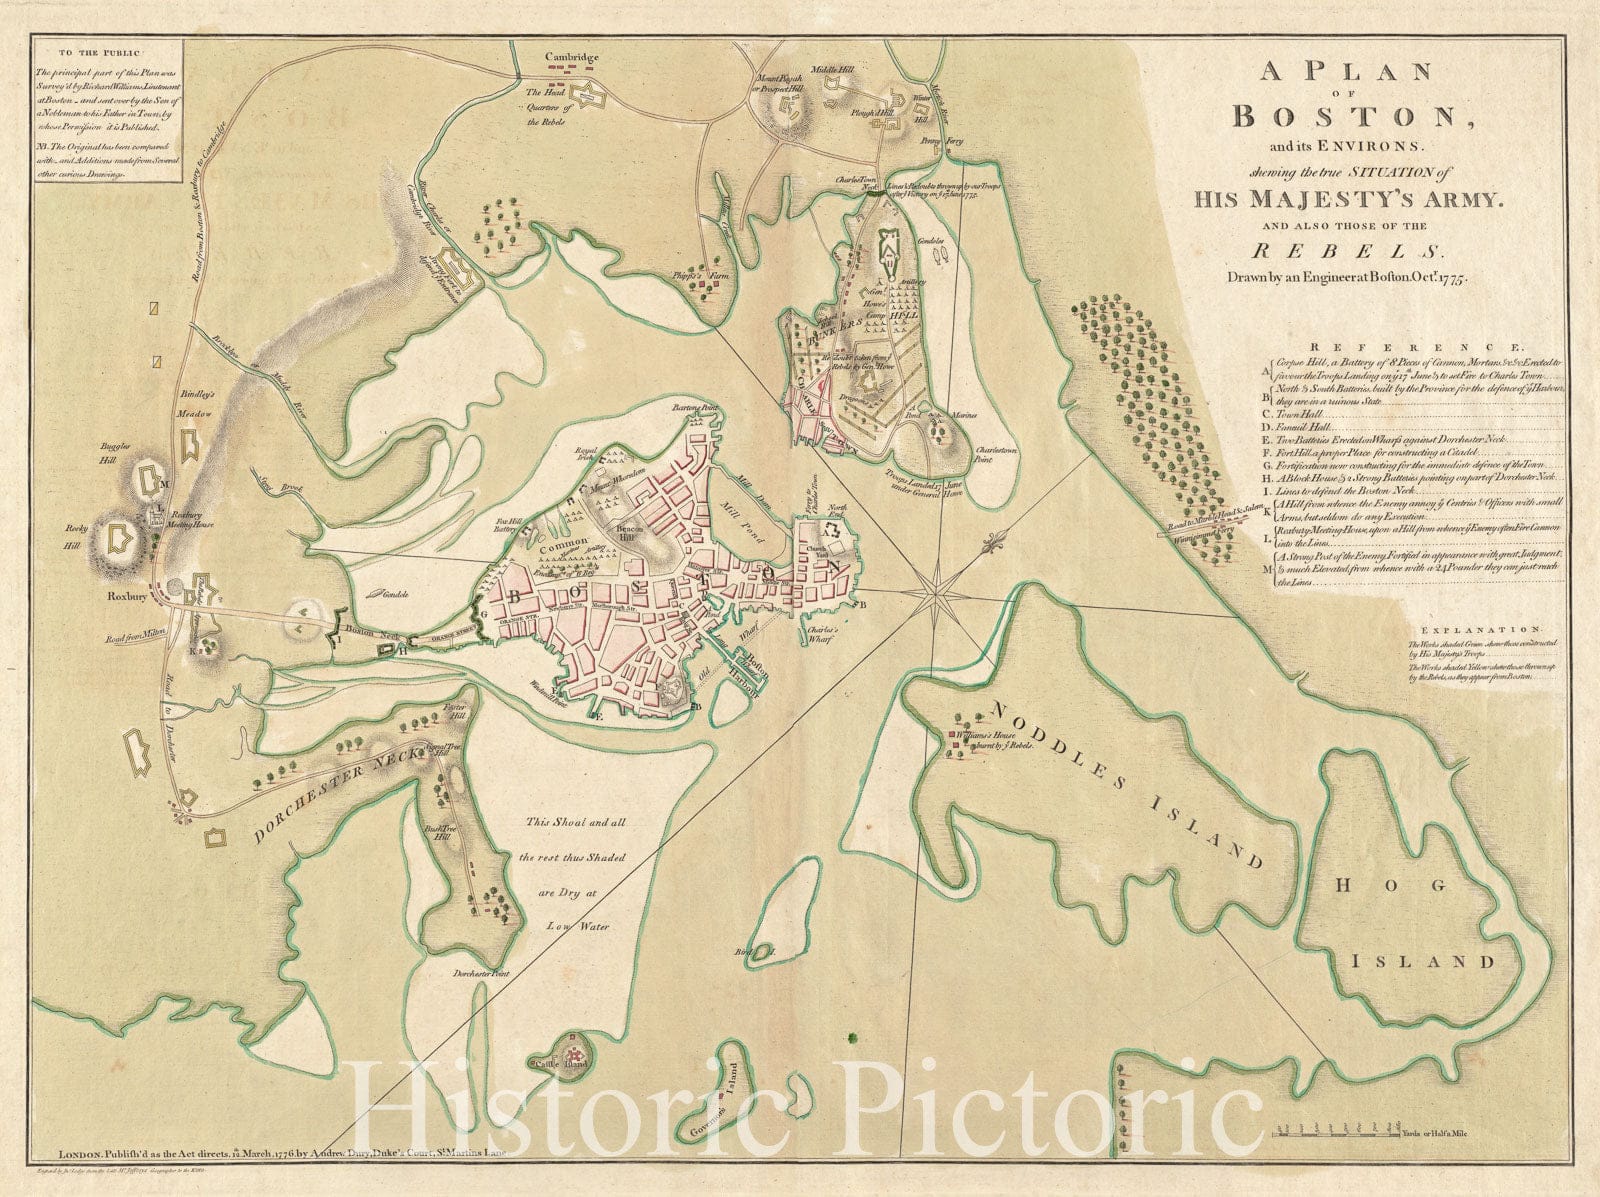 Historical Map, 1776 A Plan of Boston, and its environs : shewing the true situation of His Majesty's army, and also those of the rebels, Vintage Wall Art